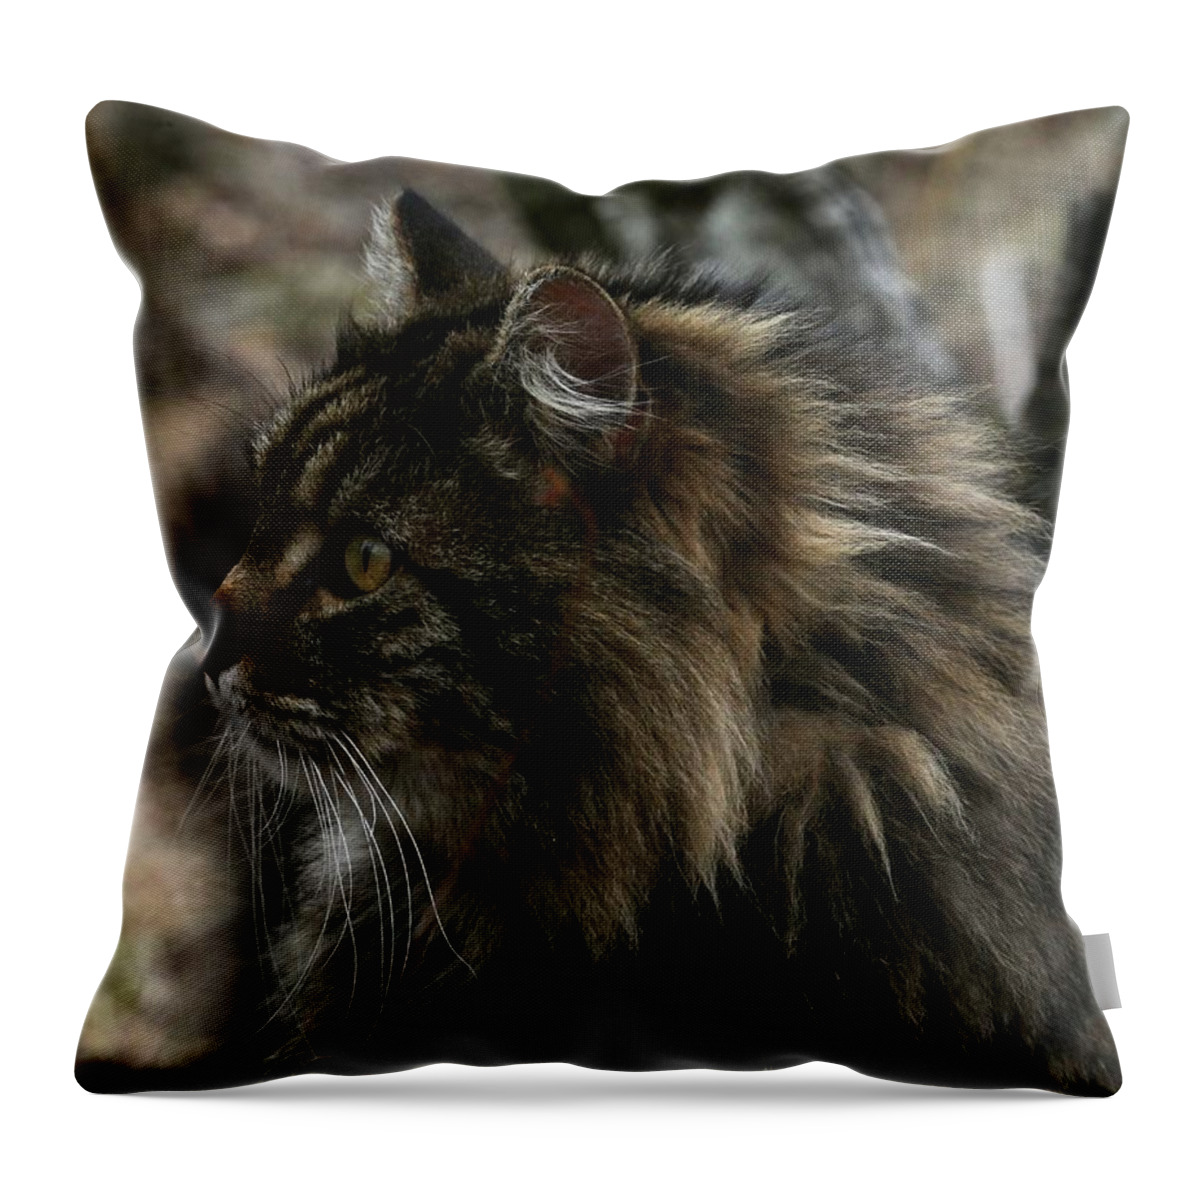 Cat Throw Pillow featuring the photograph Swiffer by Michael Dougherty